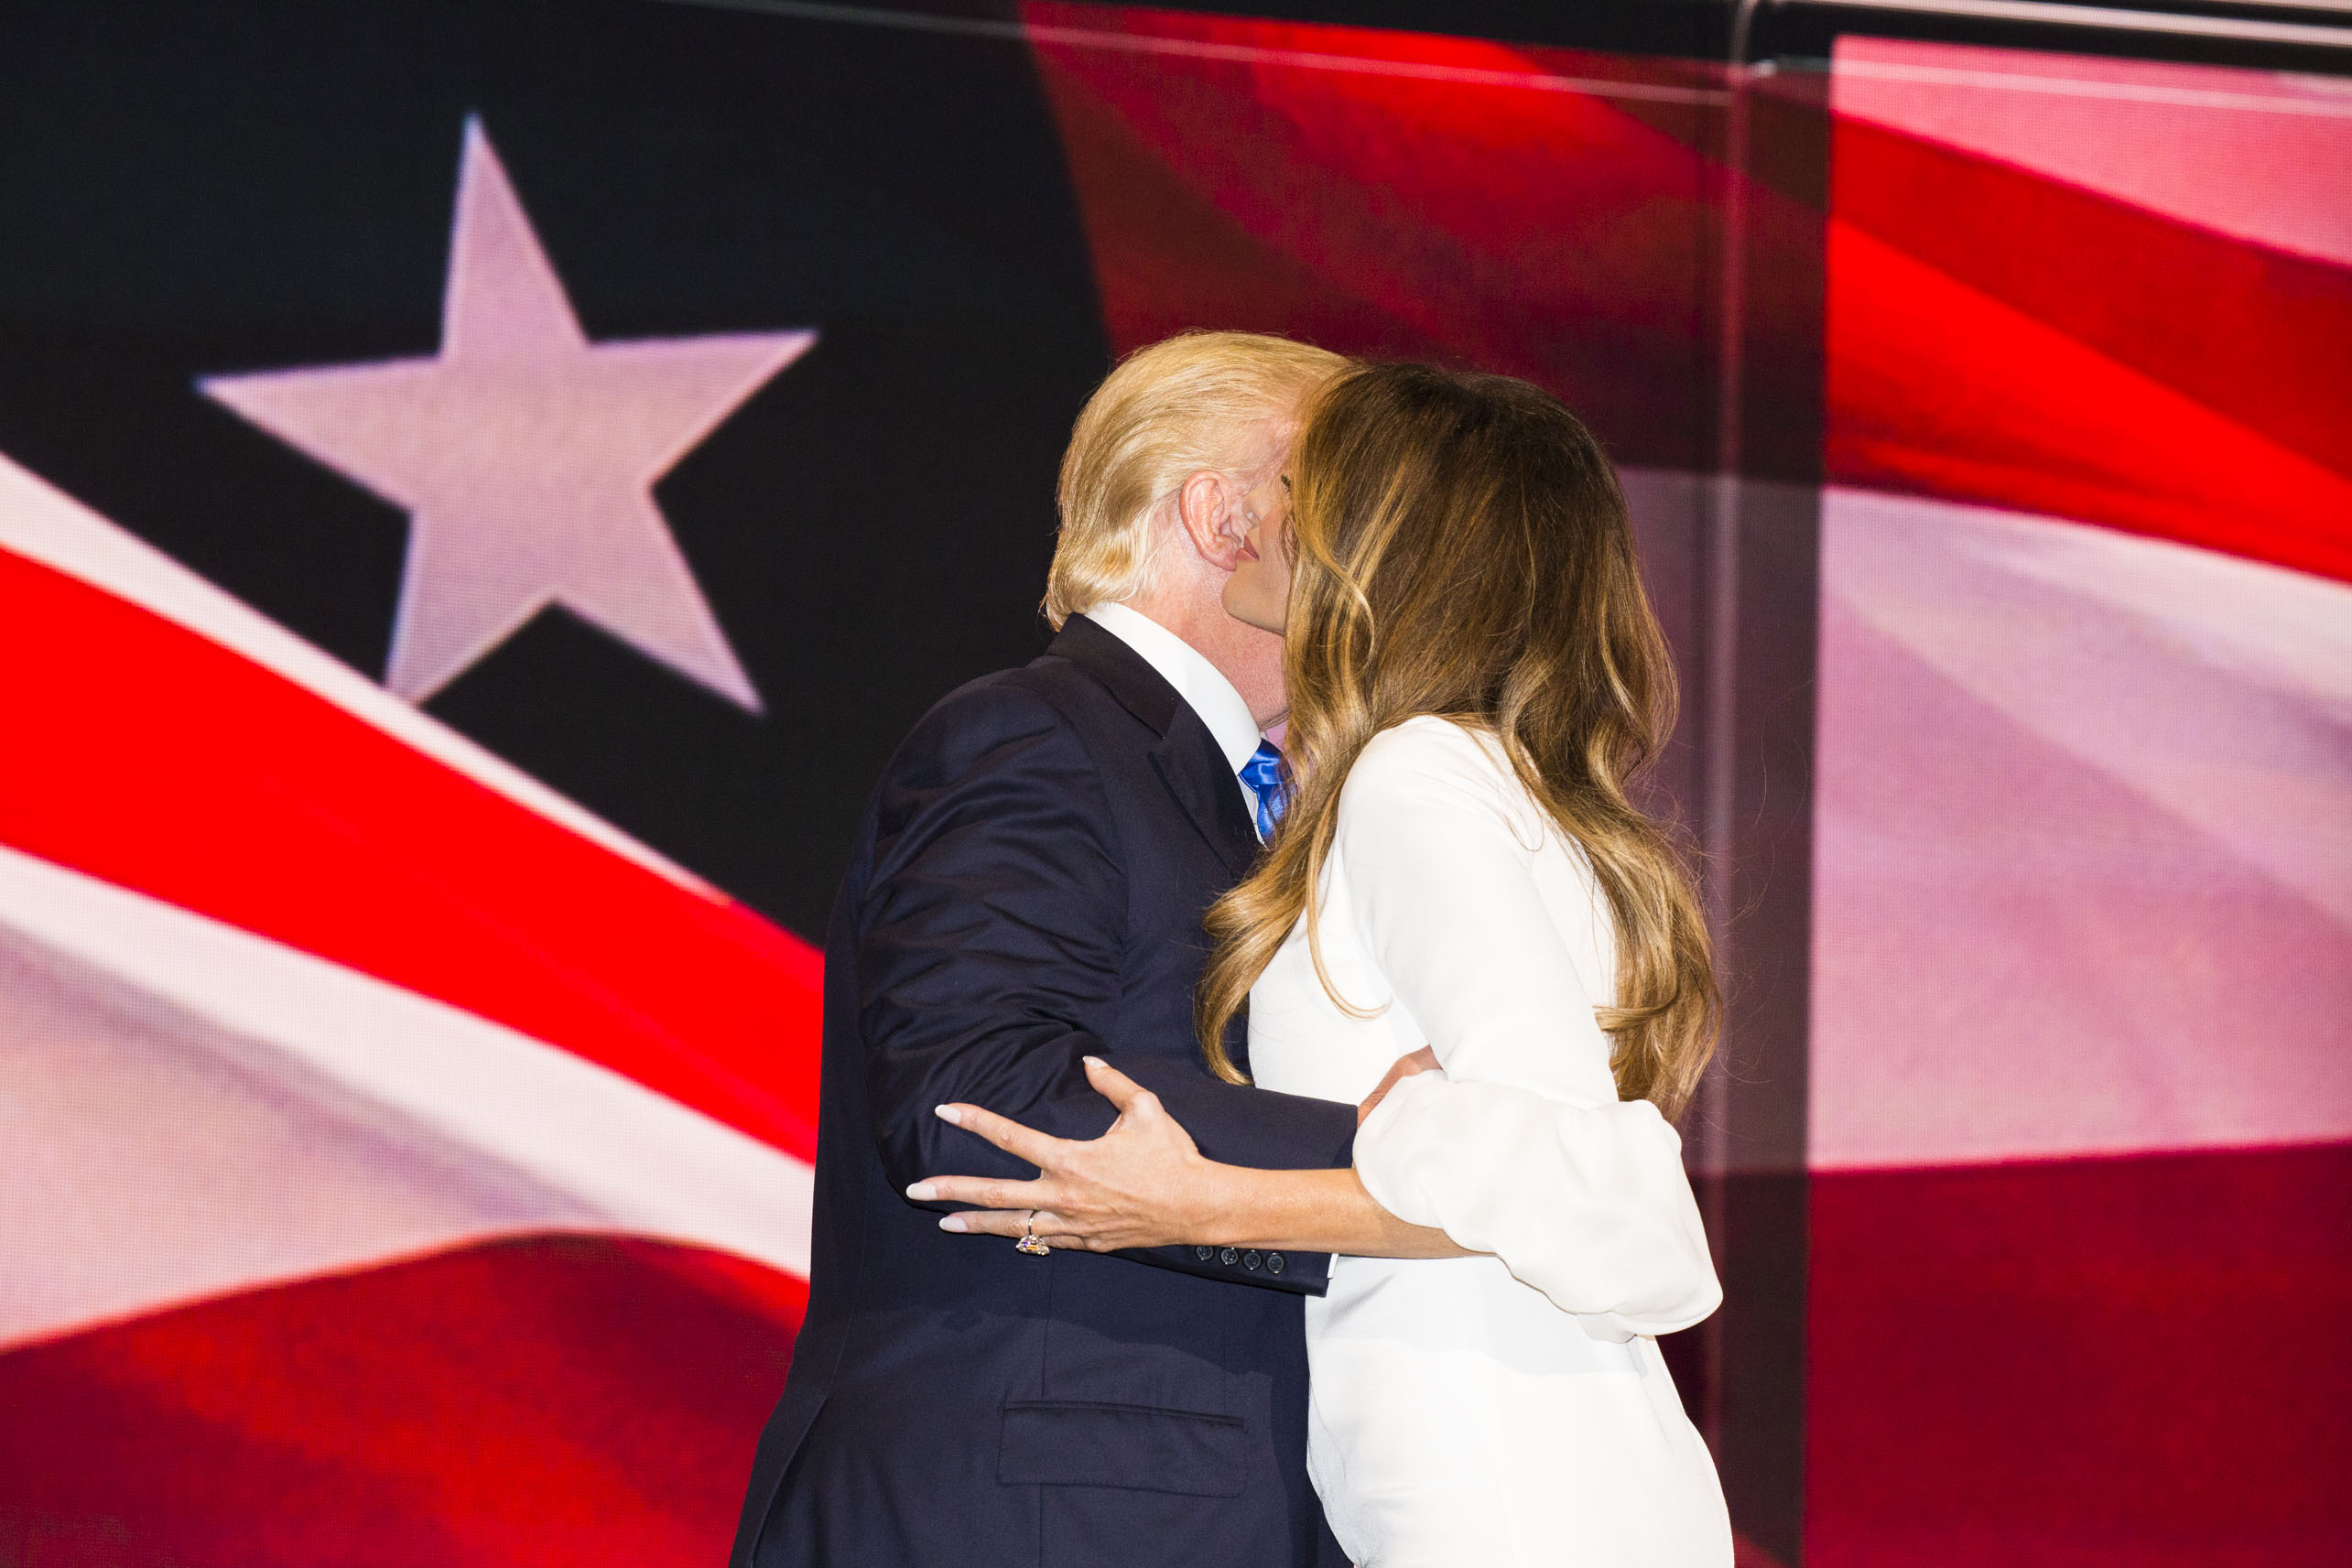 Donald Trump kisses his wife Melania at the 2016 Republican National Convention on Monday, July 18, 2016, in Cleveland. (Landon Nordeman for TIME)